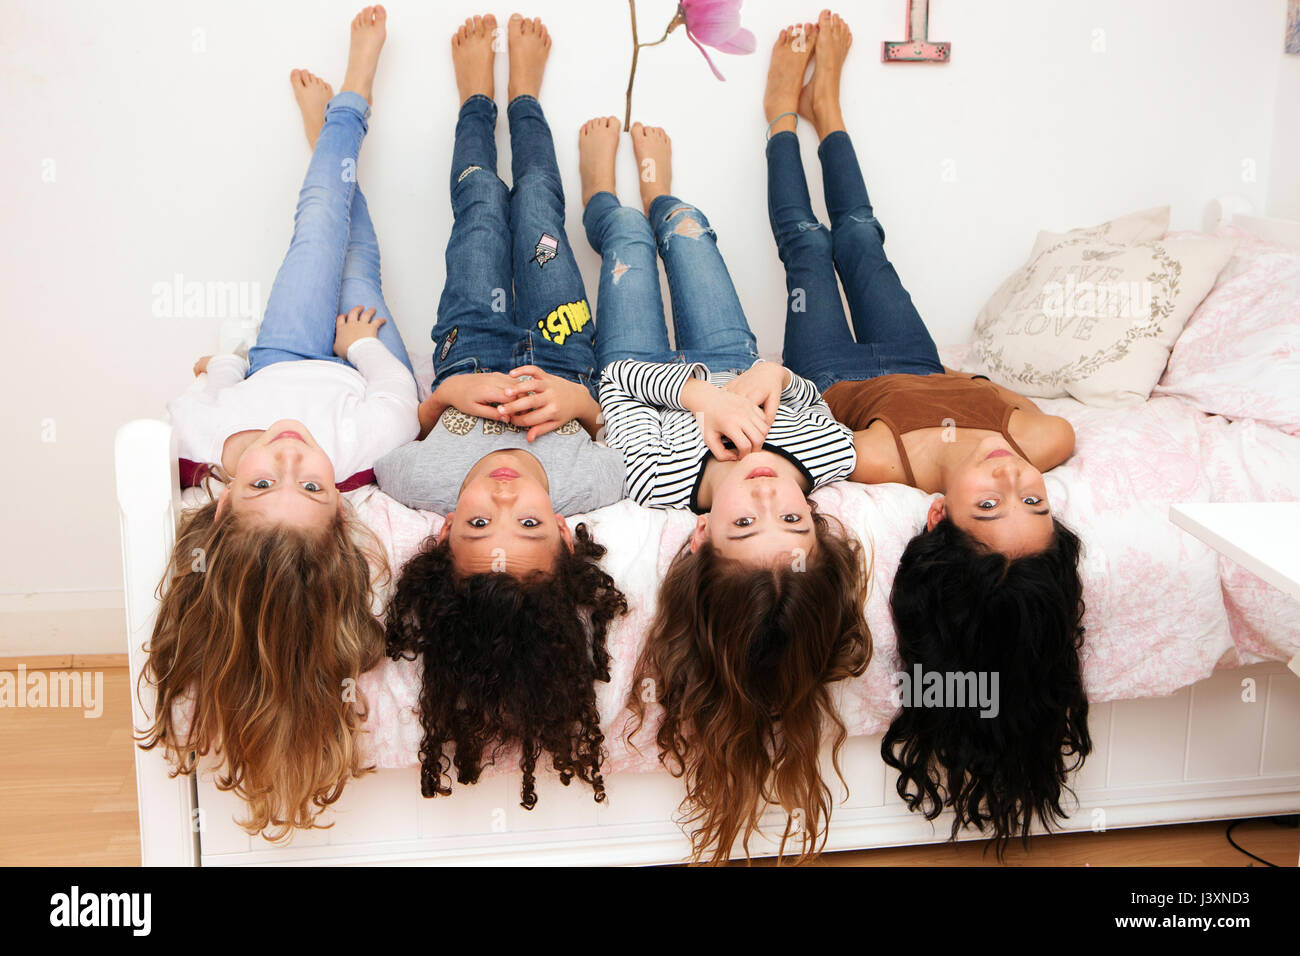 Girls lying upside down on bed looking at camera Stock Photo